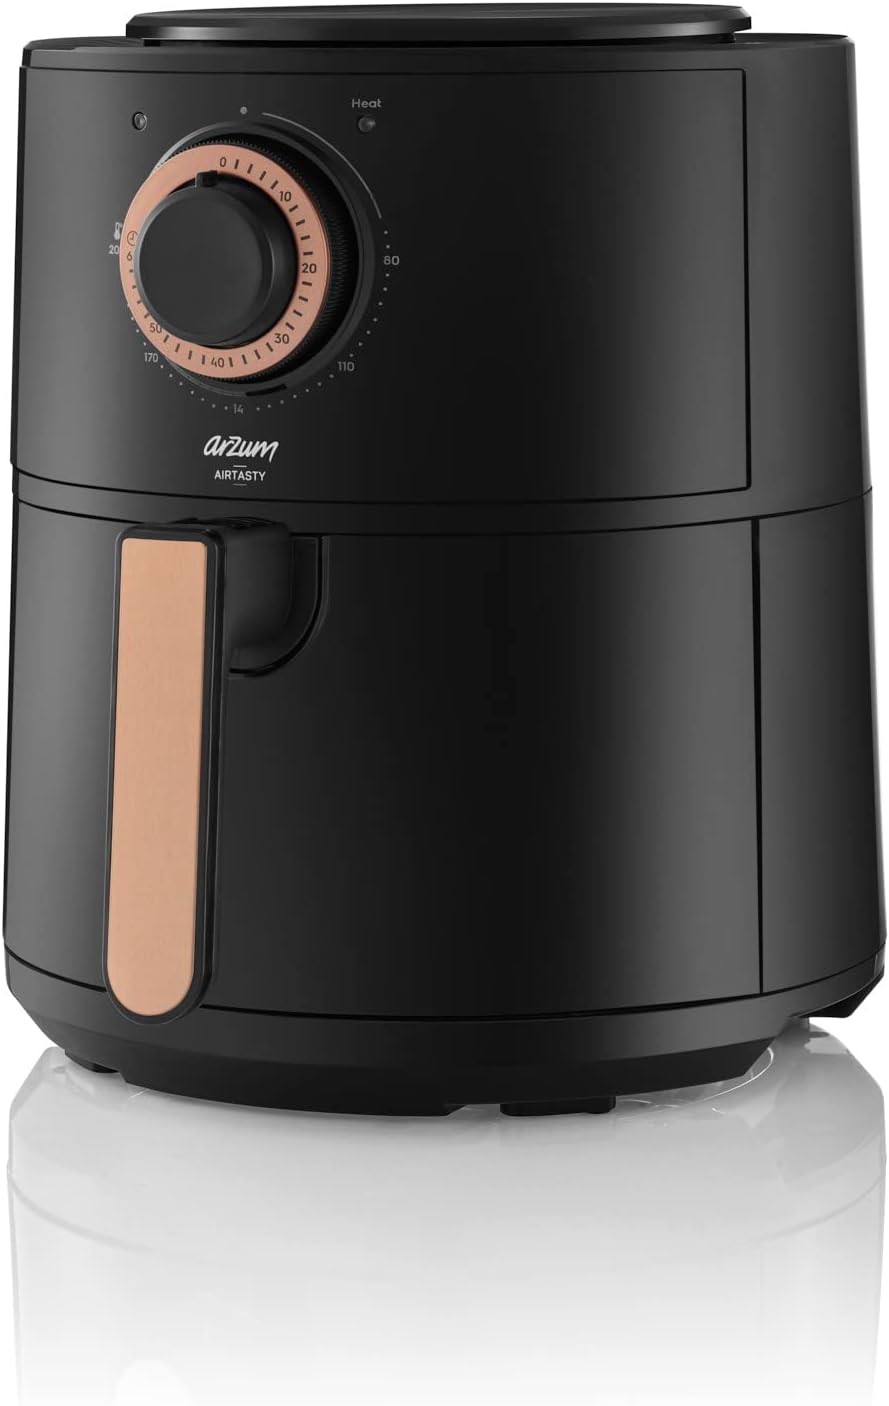 Arzum AR2062-B Airtasty Air Fryer with 4 L capacity, no oil, healthy fry, time and temperature setting, easy clean detachable basket